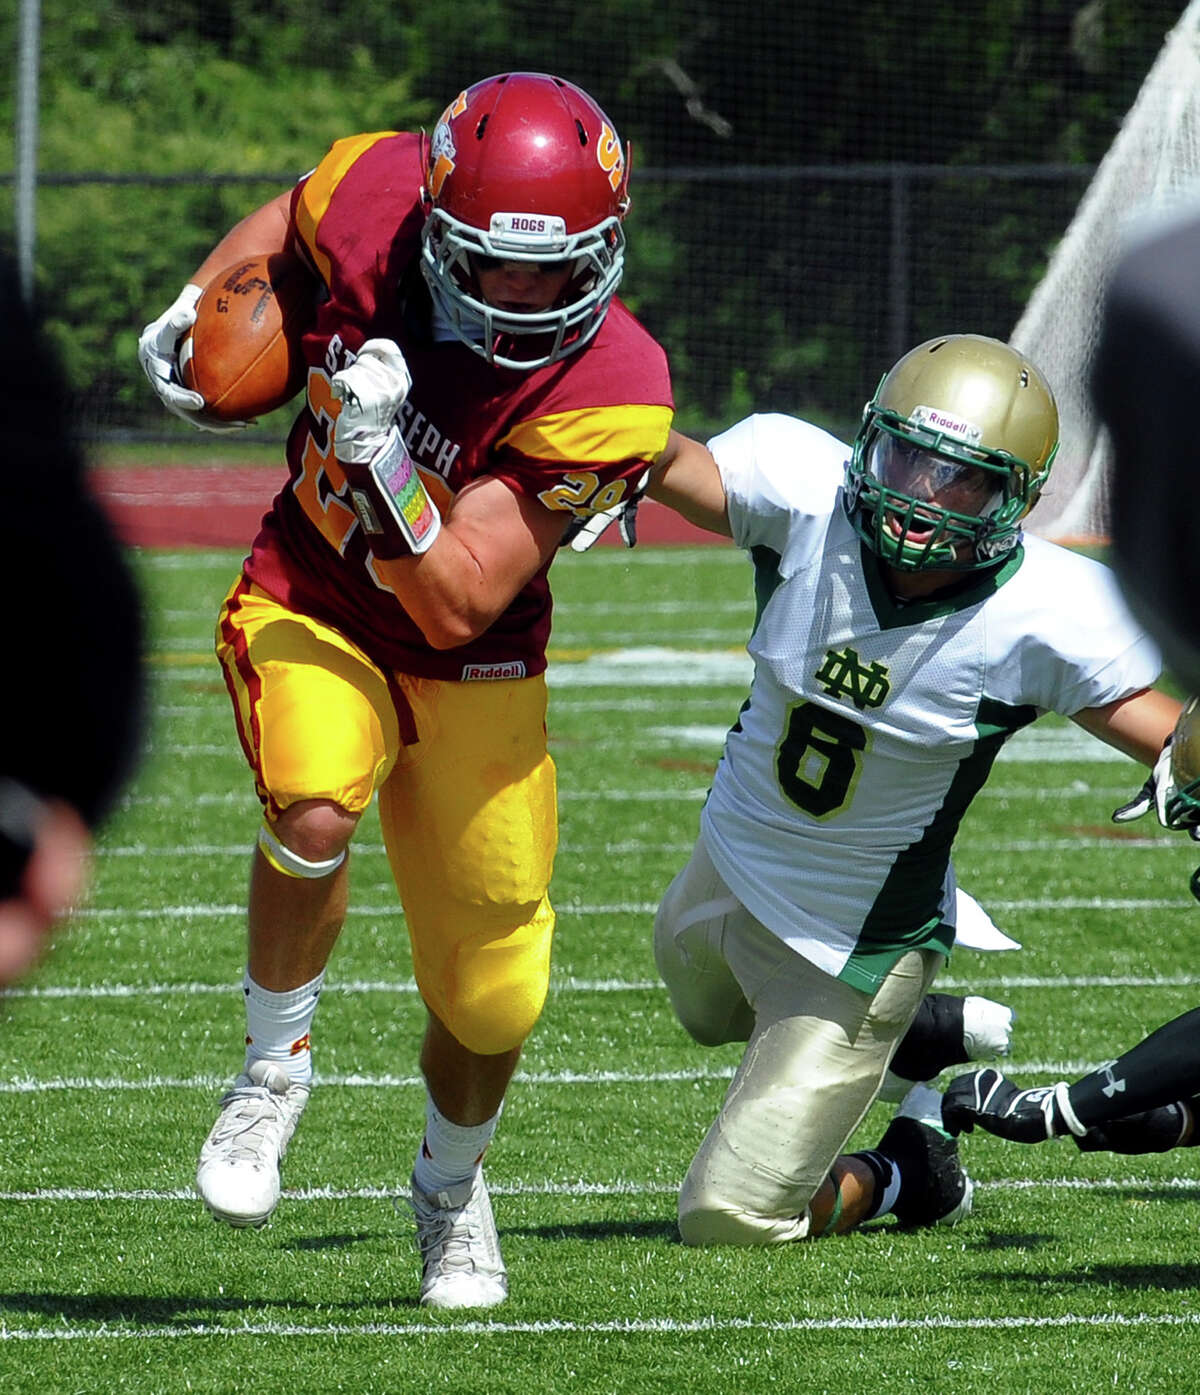 St. Joseph's Lars Pedersen, during high school football action against Notre Dame of West Haven in Trumbull, Conn. on Saturday September 14, 2013.